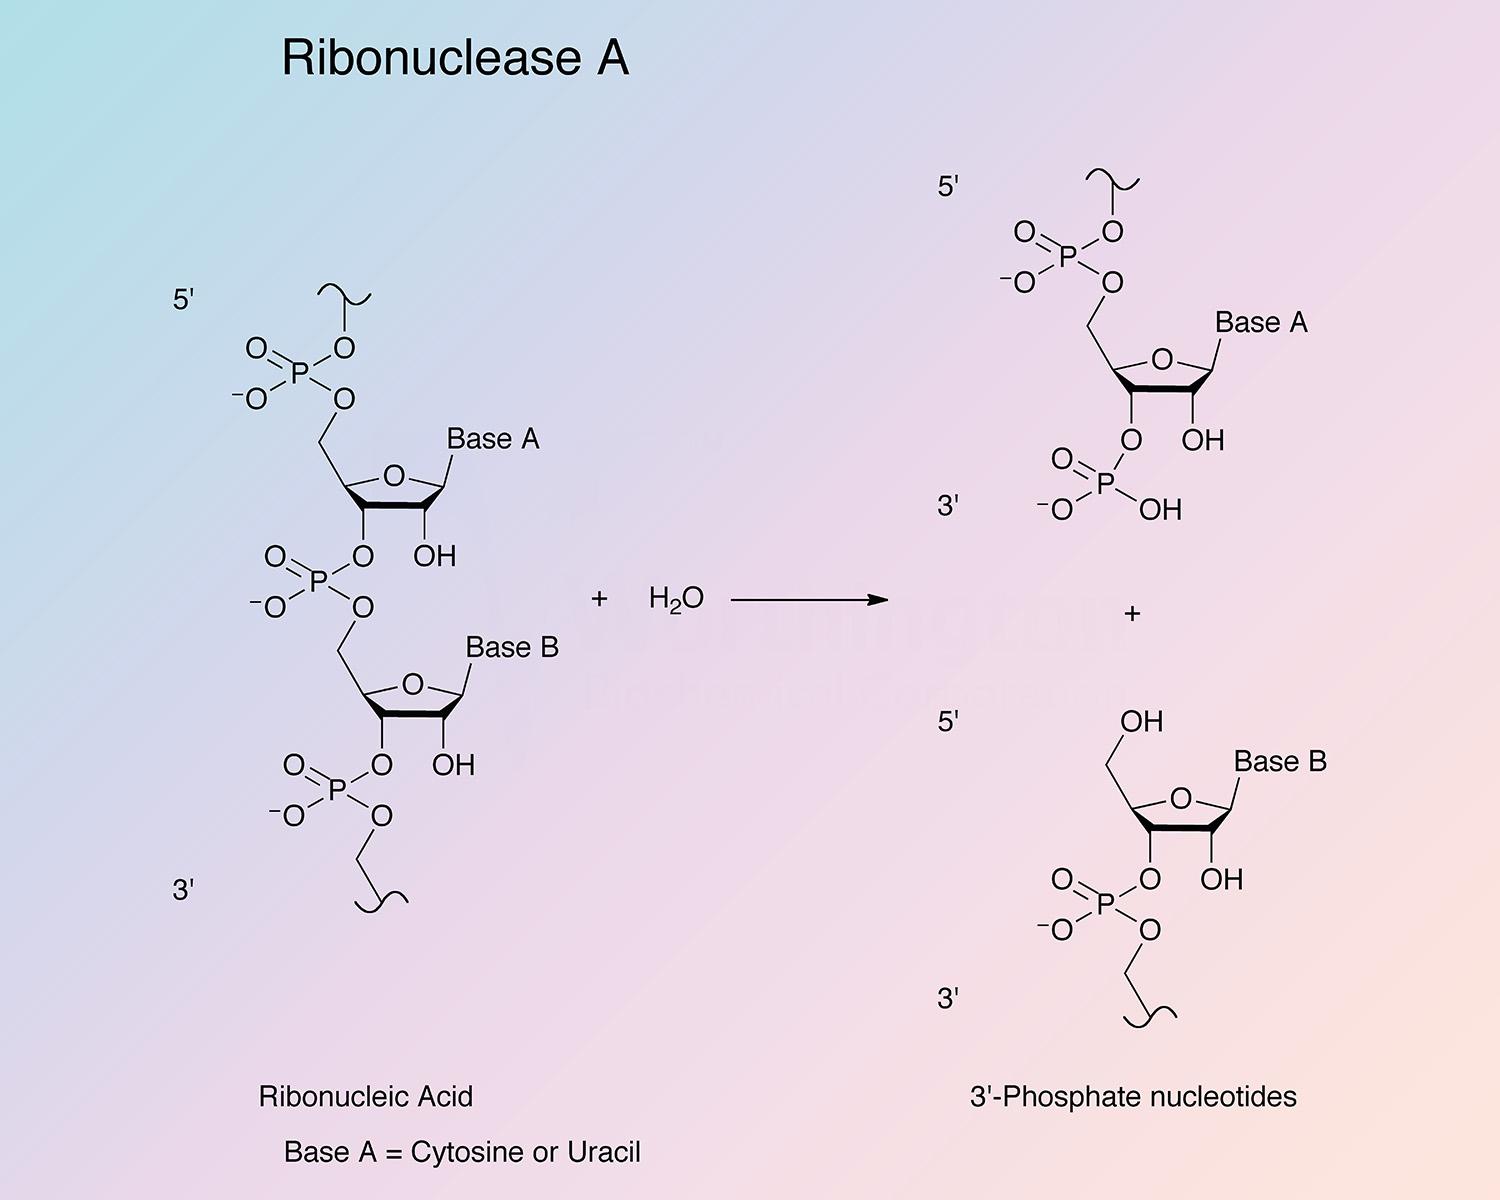 Ribonuclease A Enzymatic Reaction